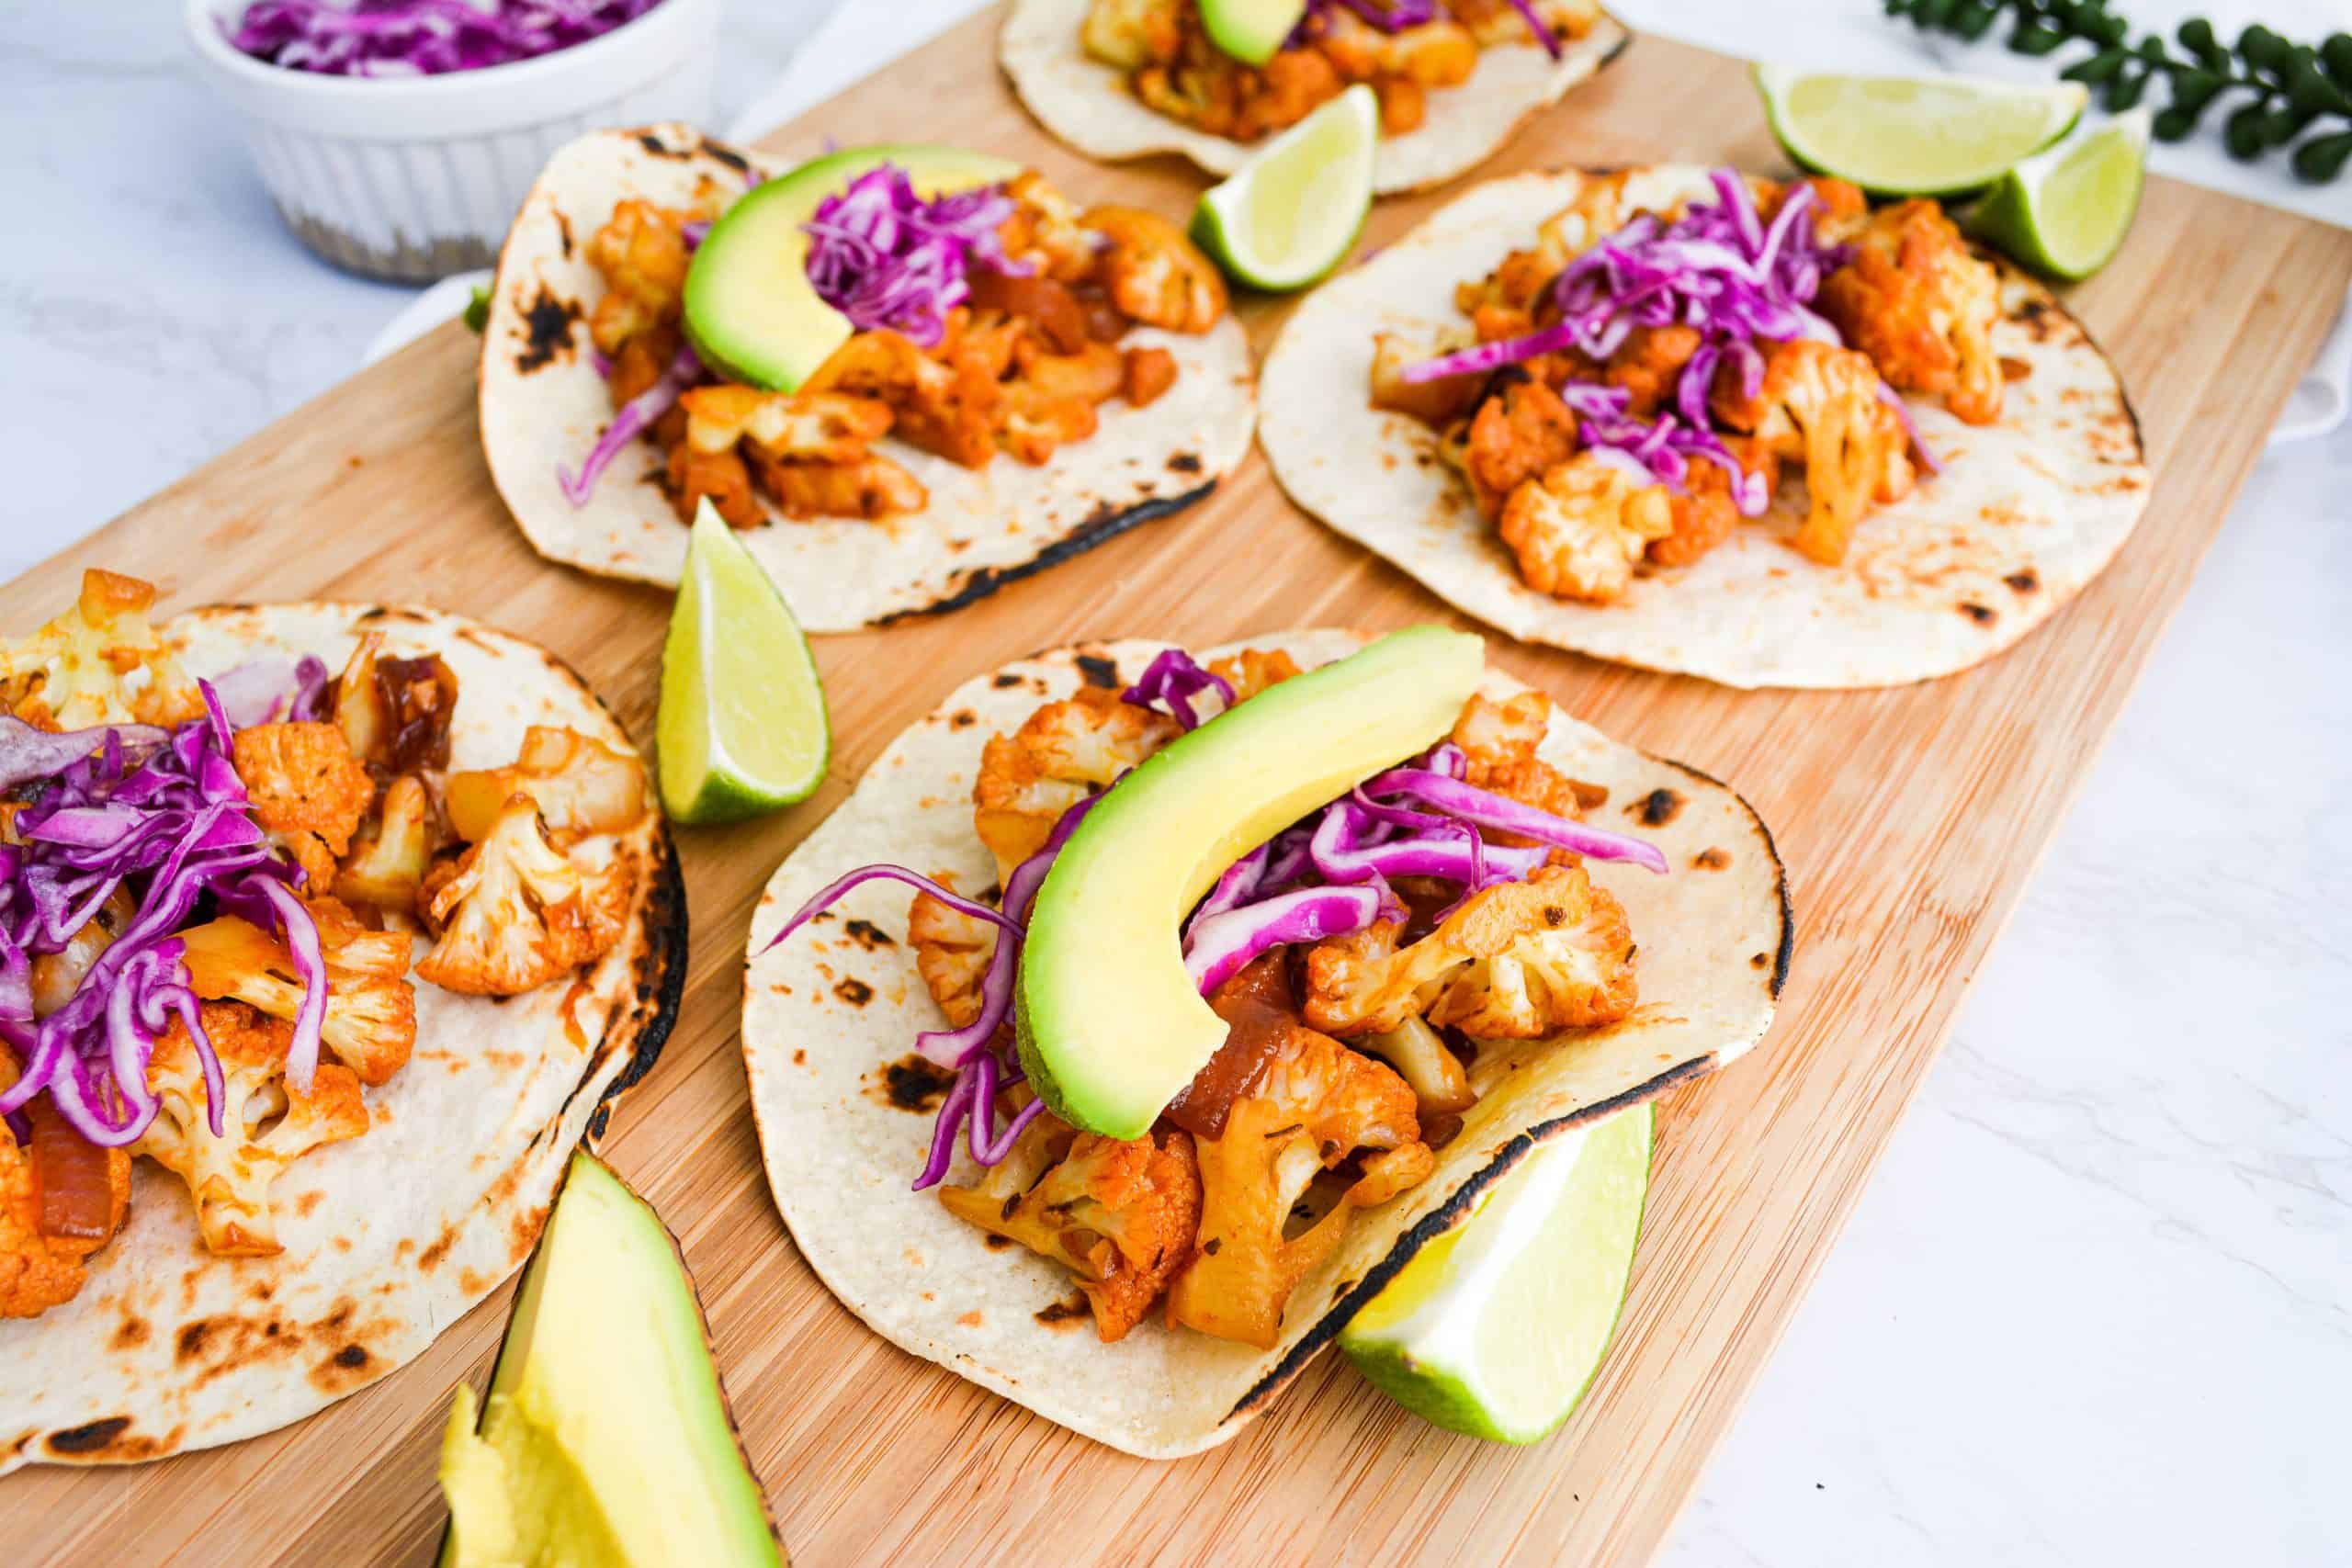 20 Minute Sweet and Spicy Agave Chipotle Cauliflower Tacos